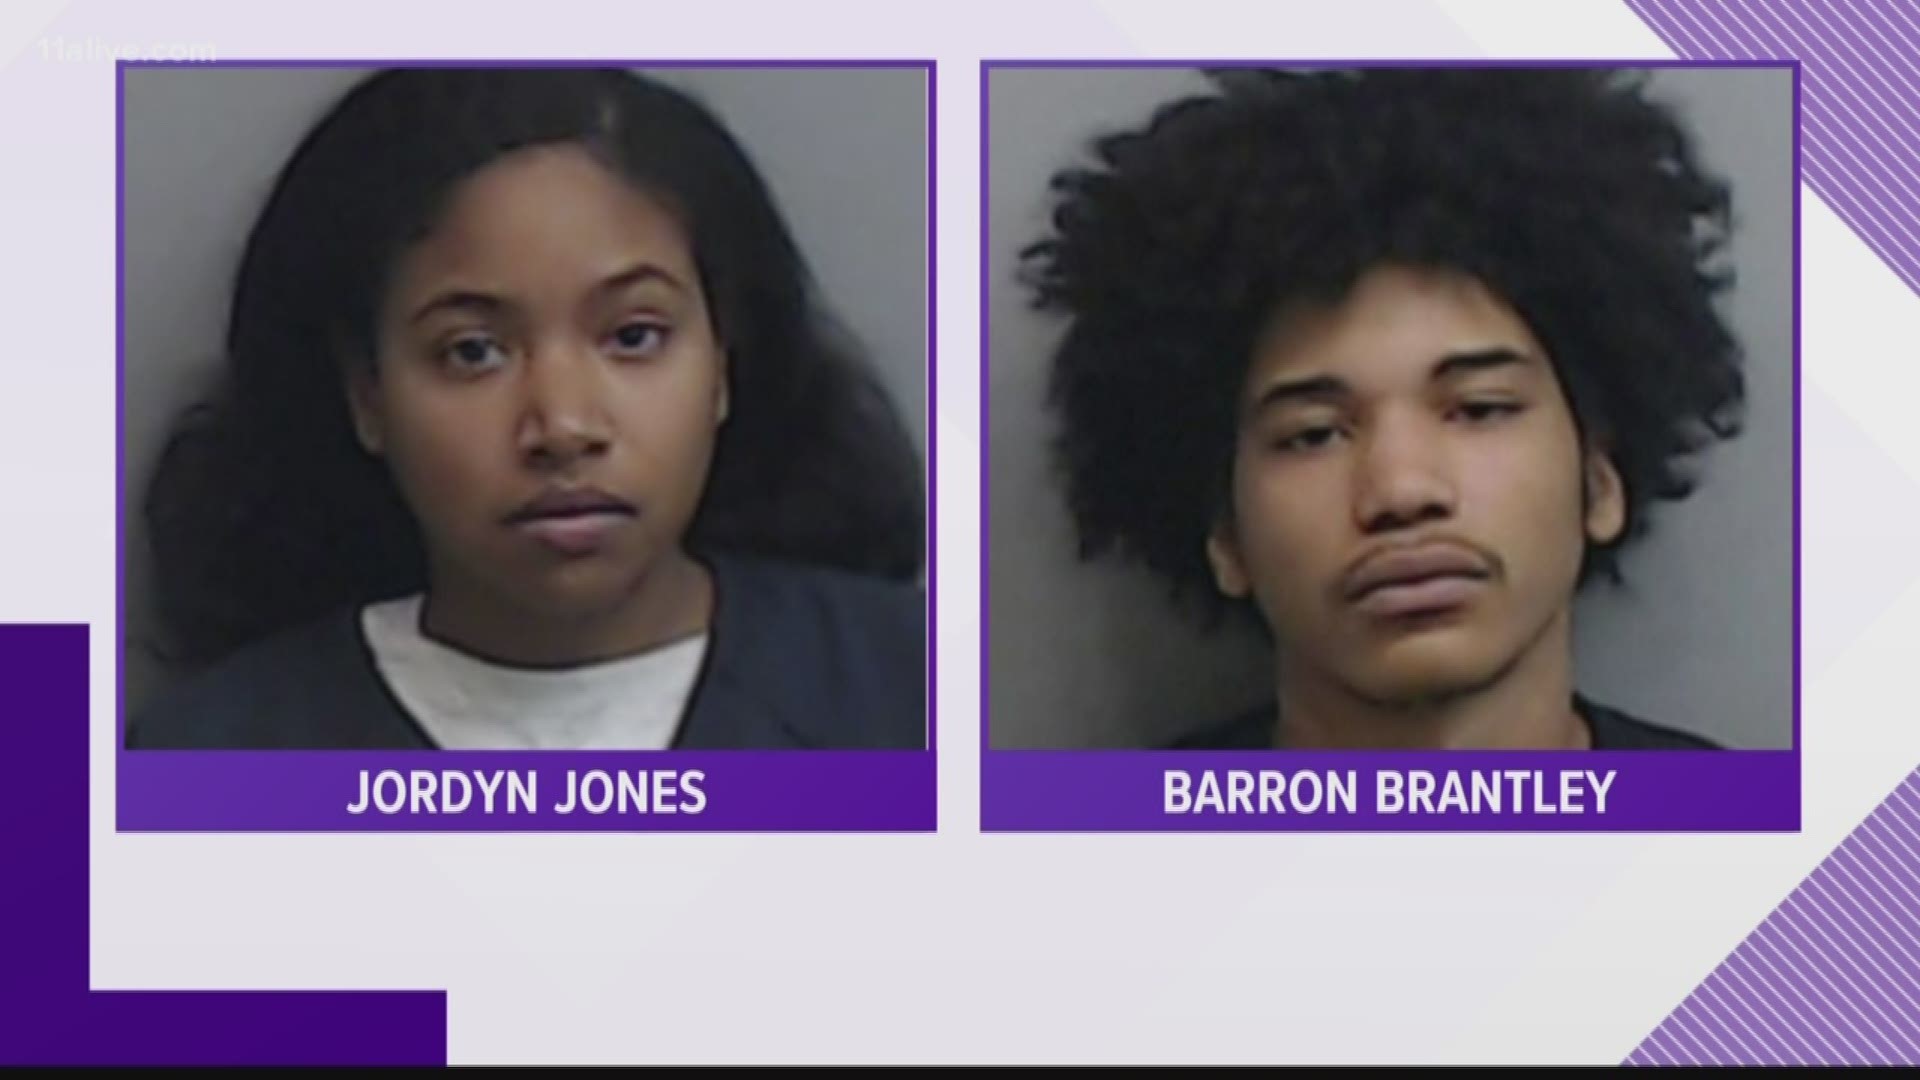 The accused killers of Alexis Crawford - her friend and roommate Jordyn Jones and Jones' boyfriend, Barron Brantley - face multiple charges each after being indicted